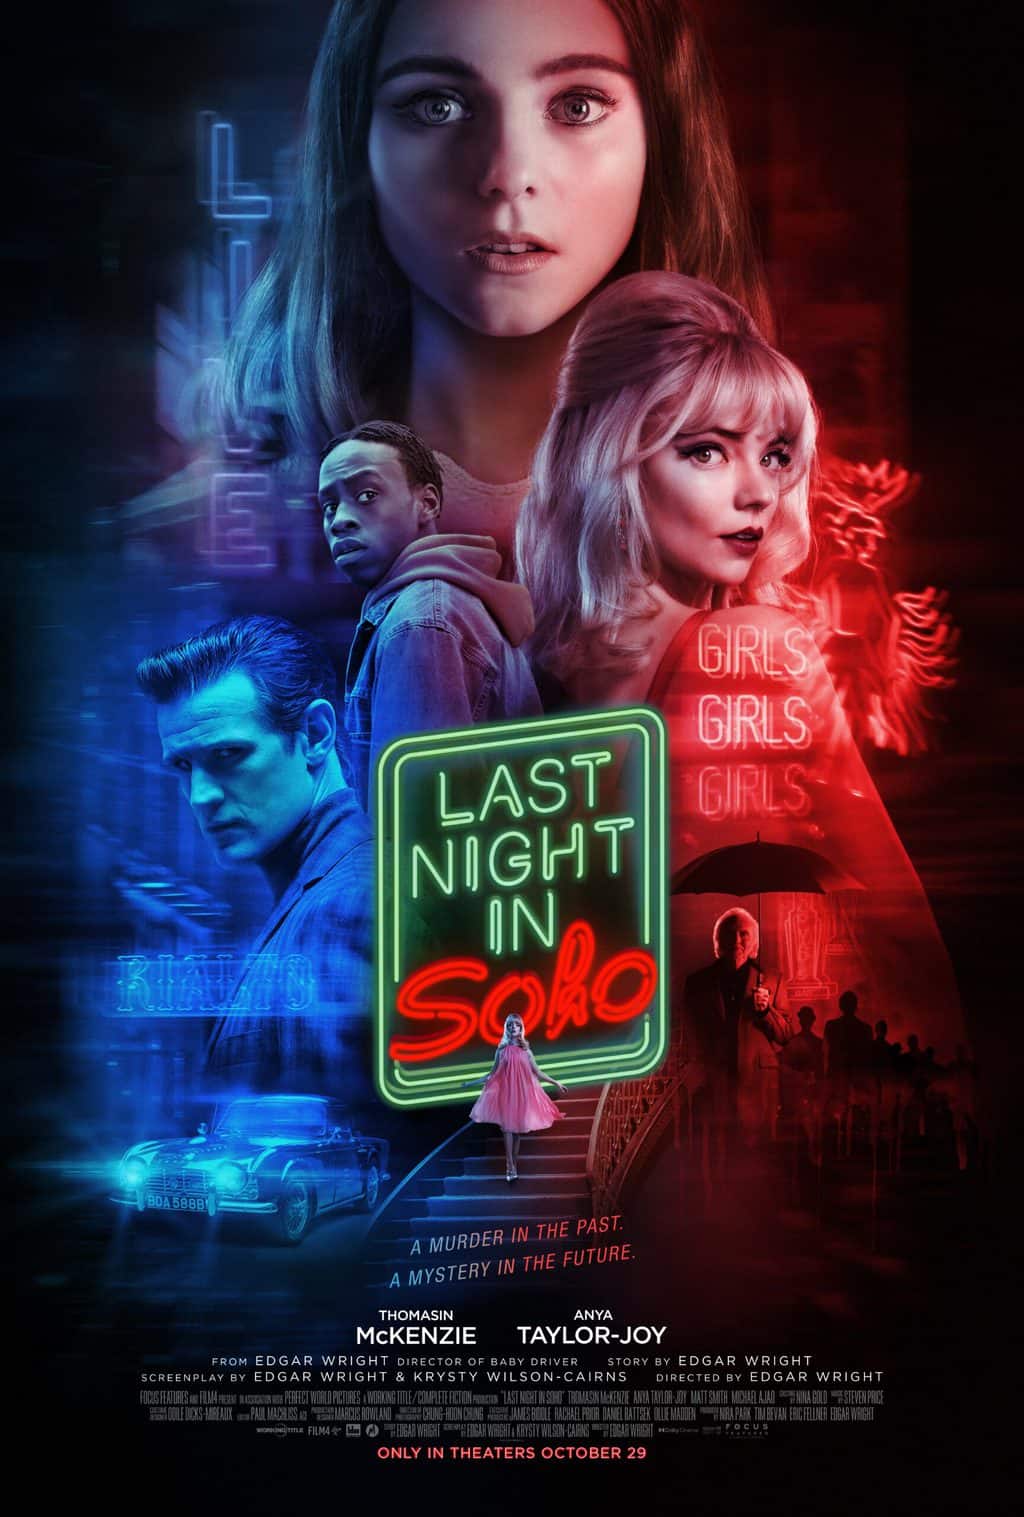 is Last Night in Soho Too Scary For Kids? parent review